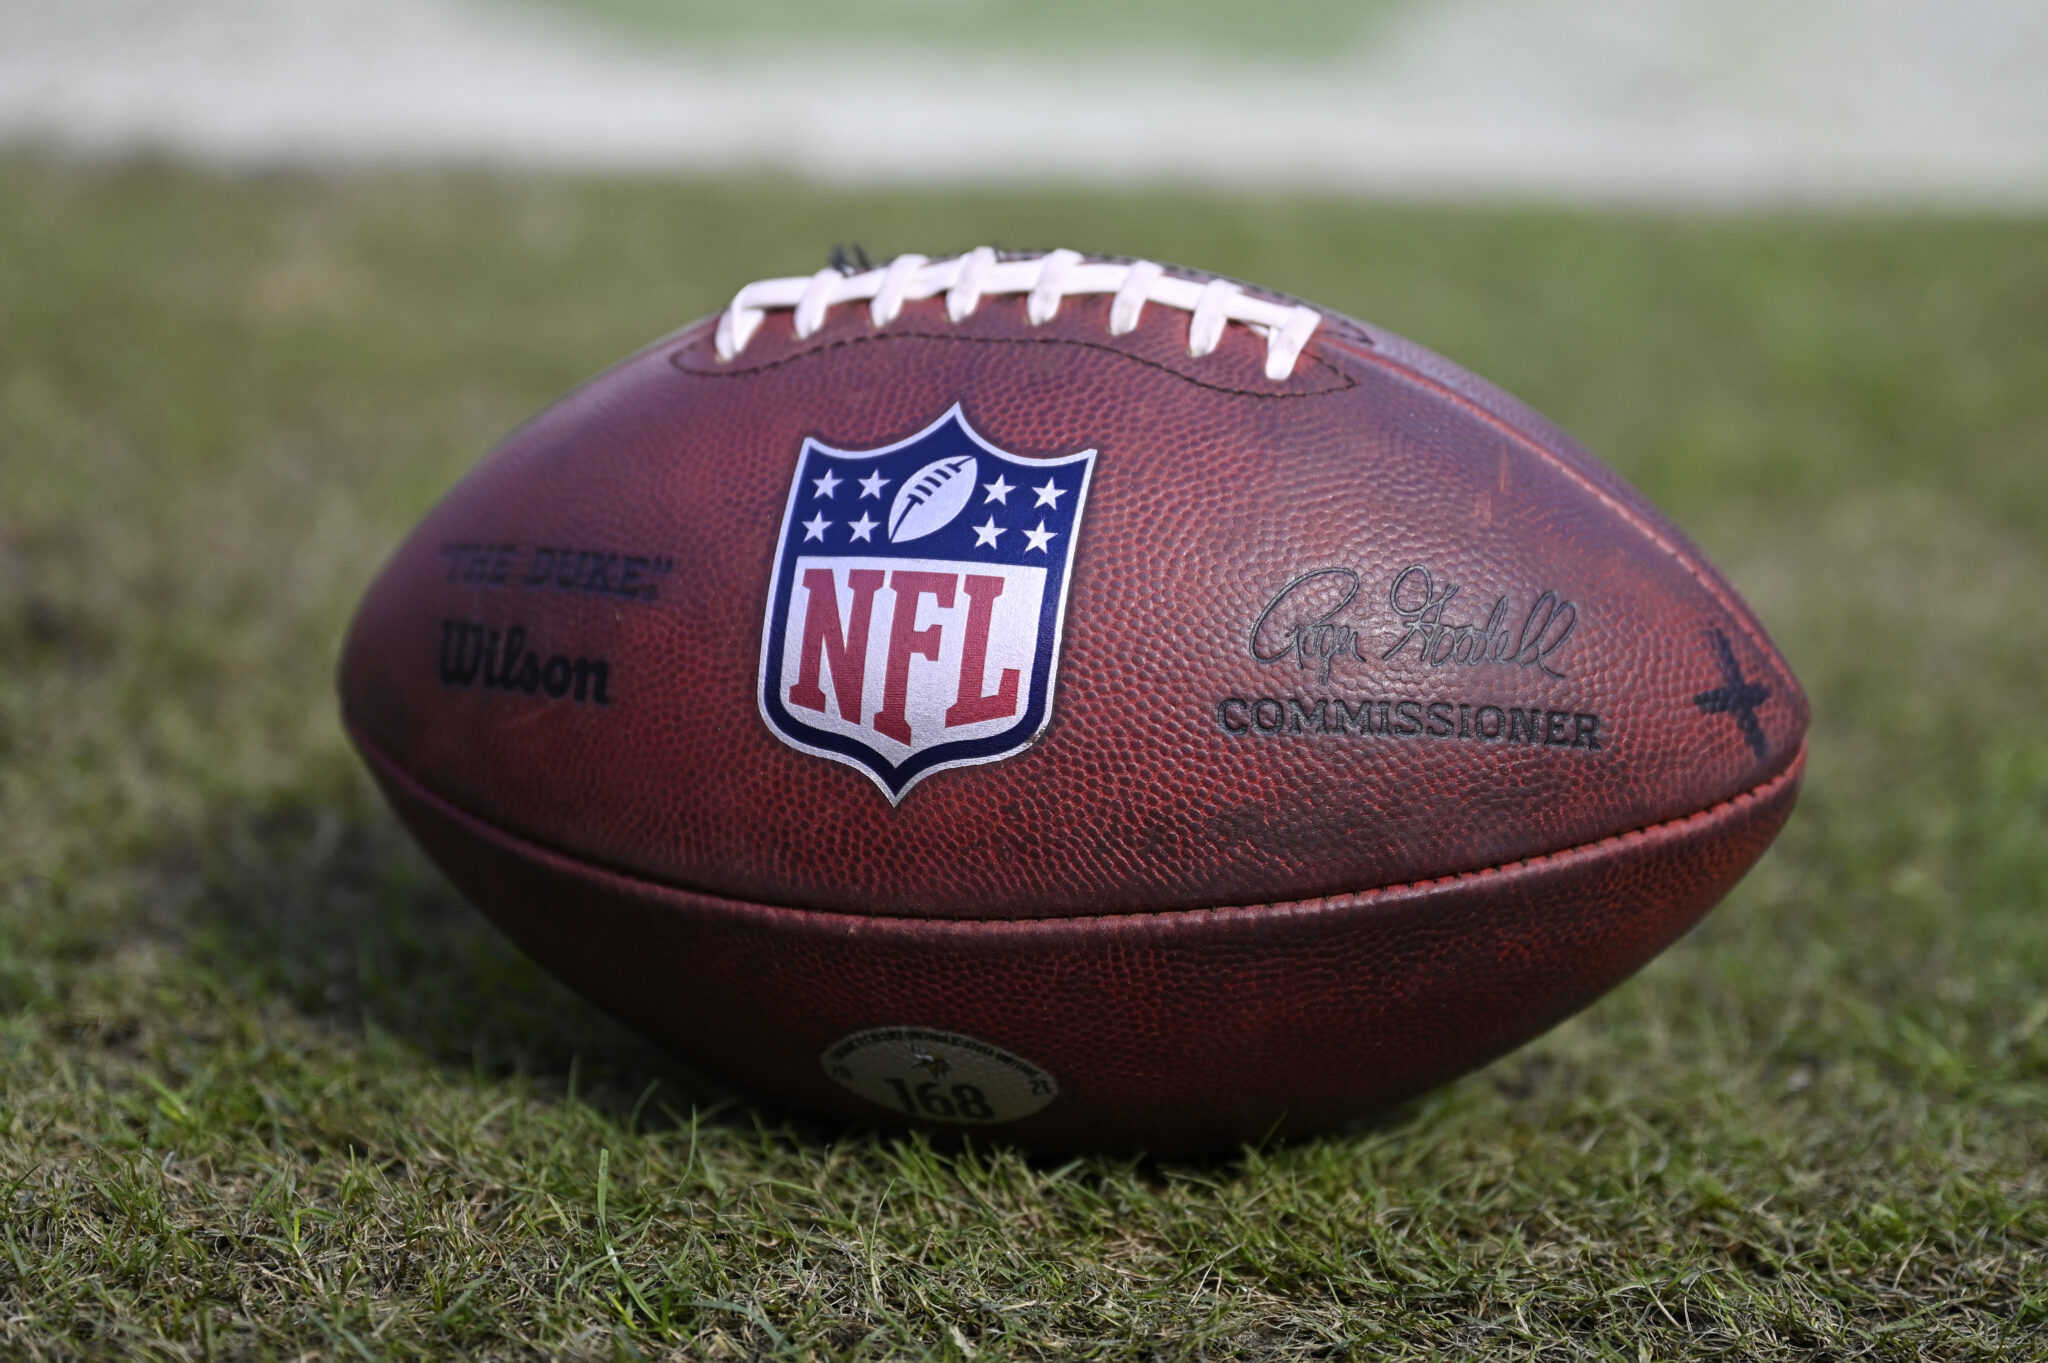 An NFL team is said to be offering a 25 share of ownership for sale